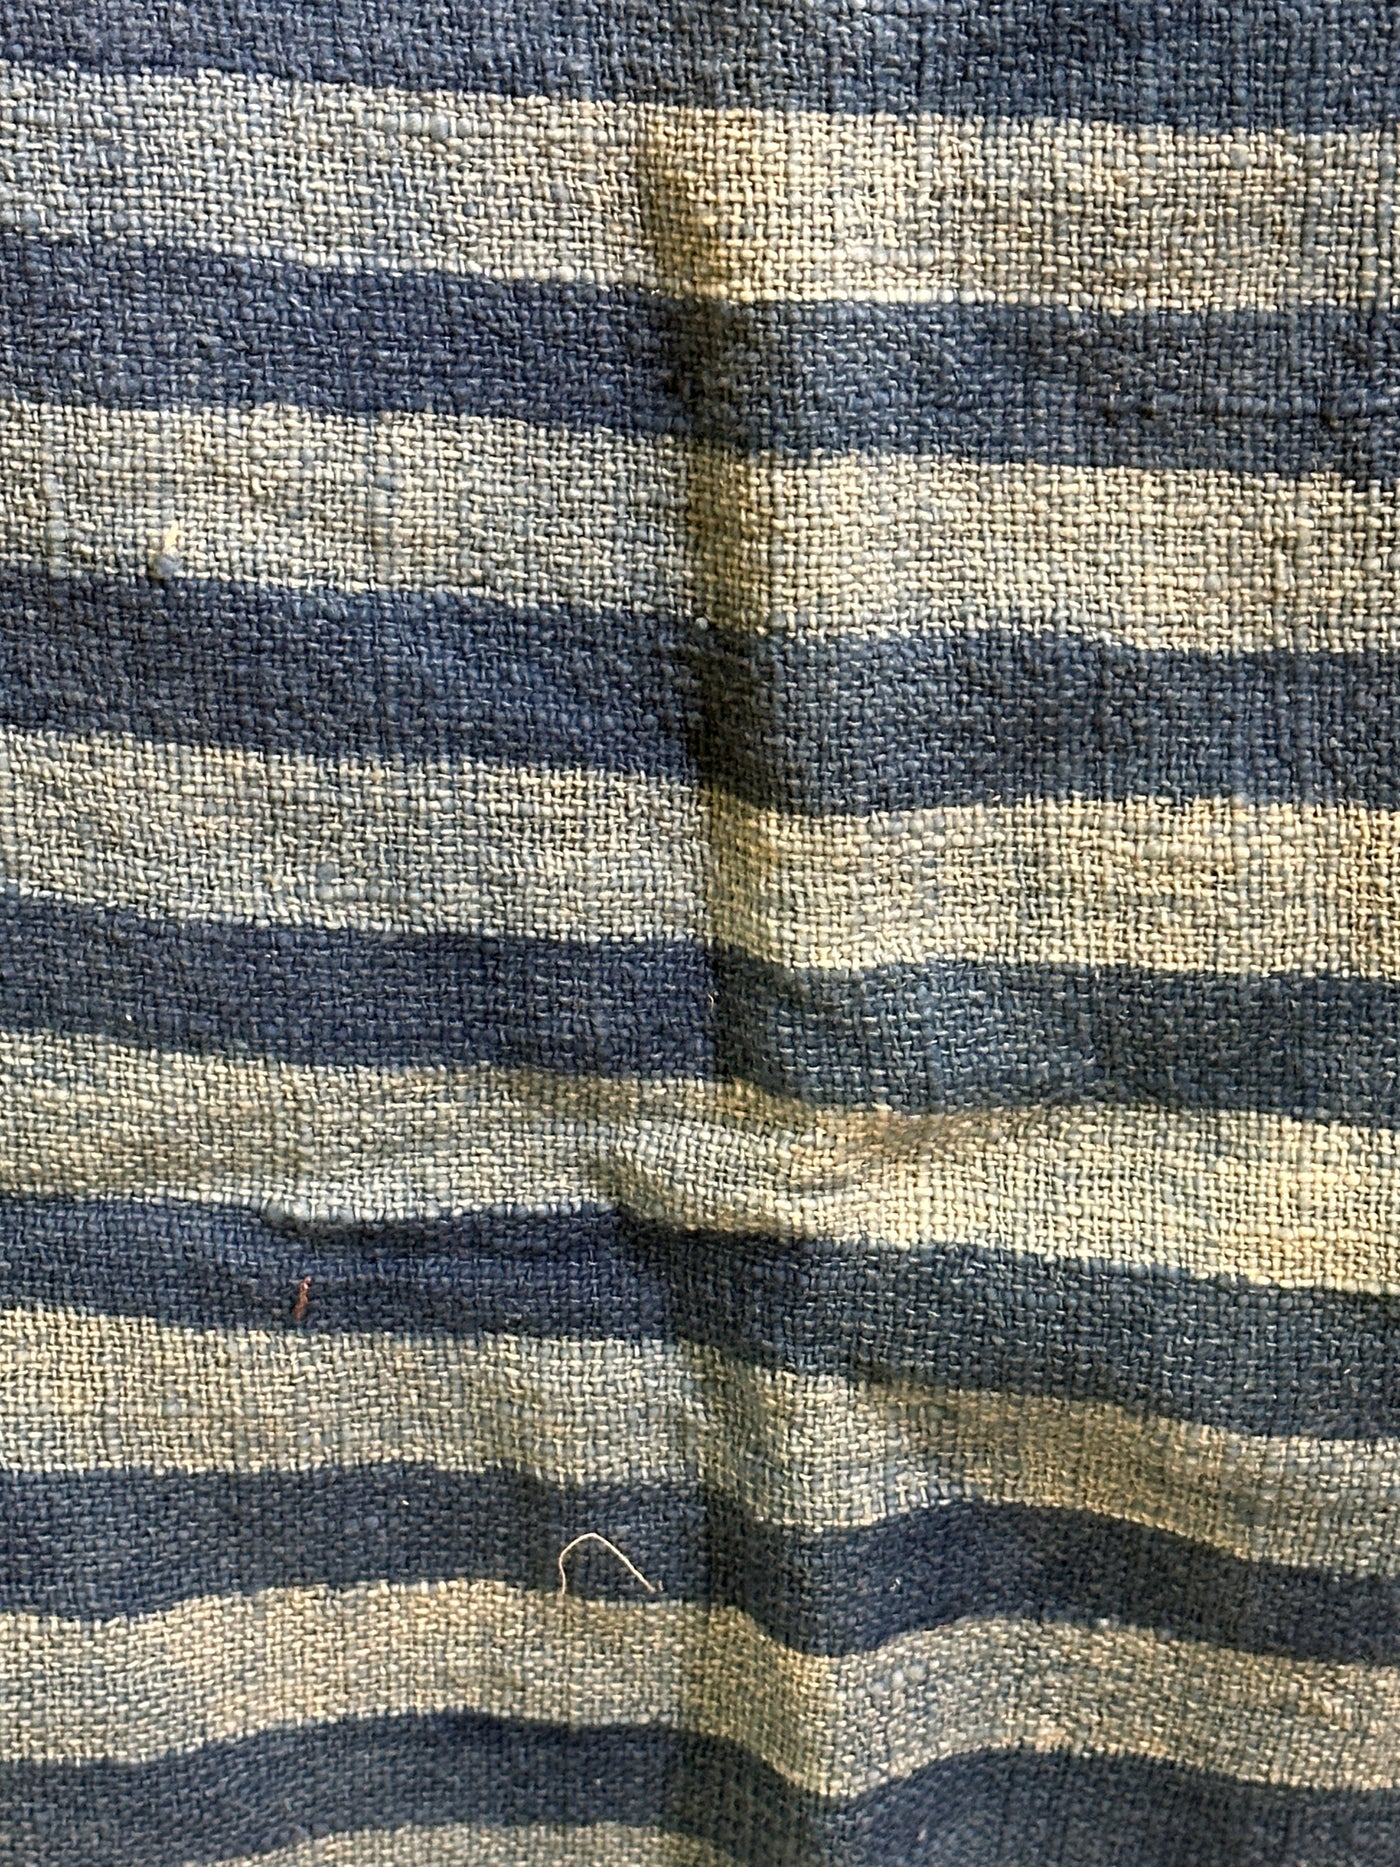 Blue Striped Handwoven Embroidered Throw/Towel